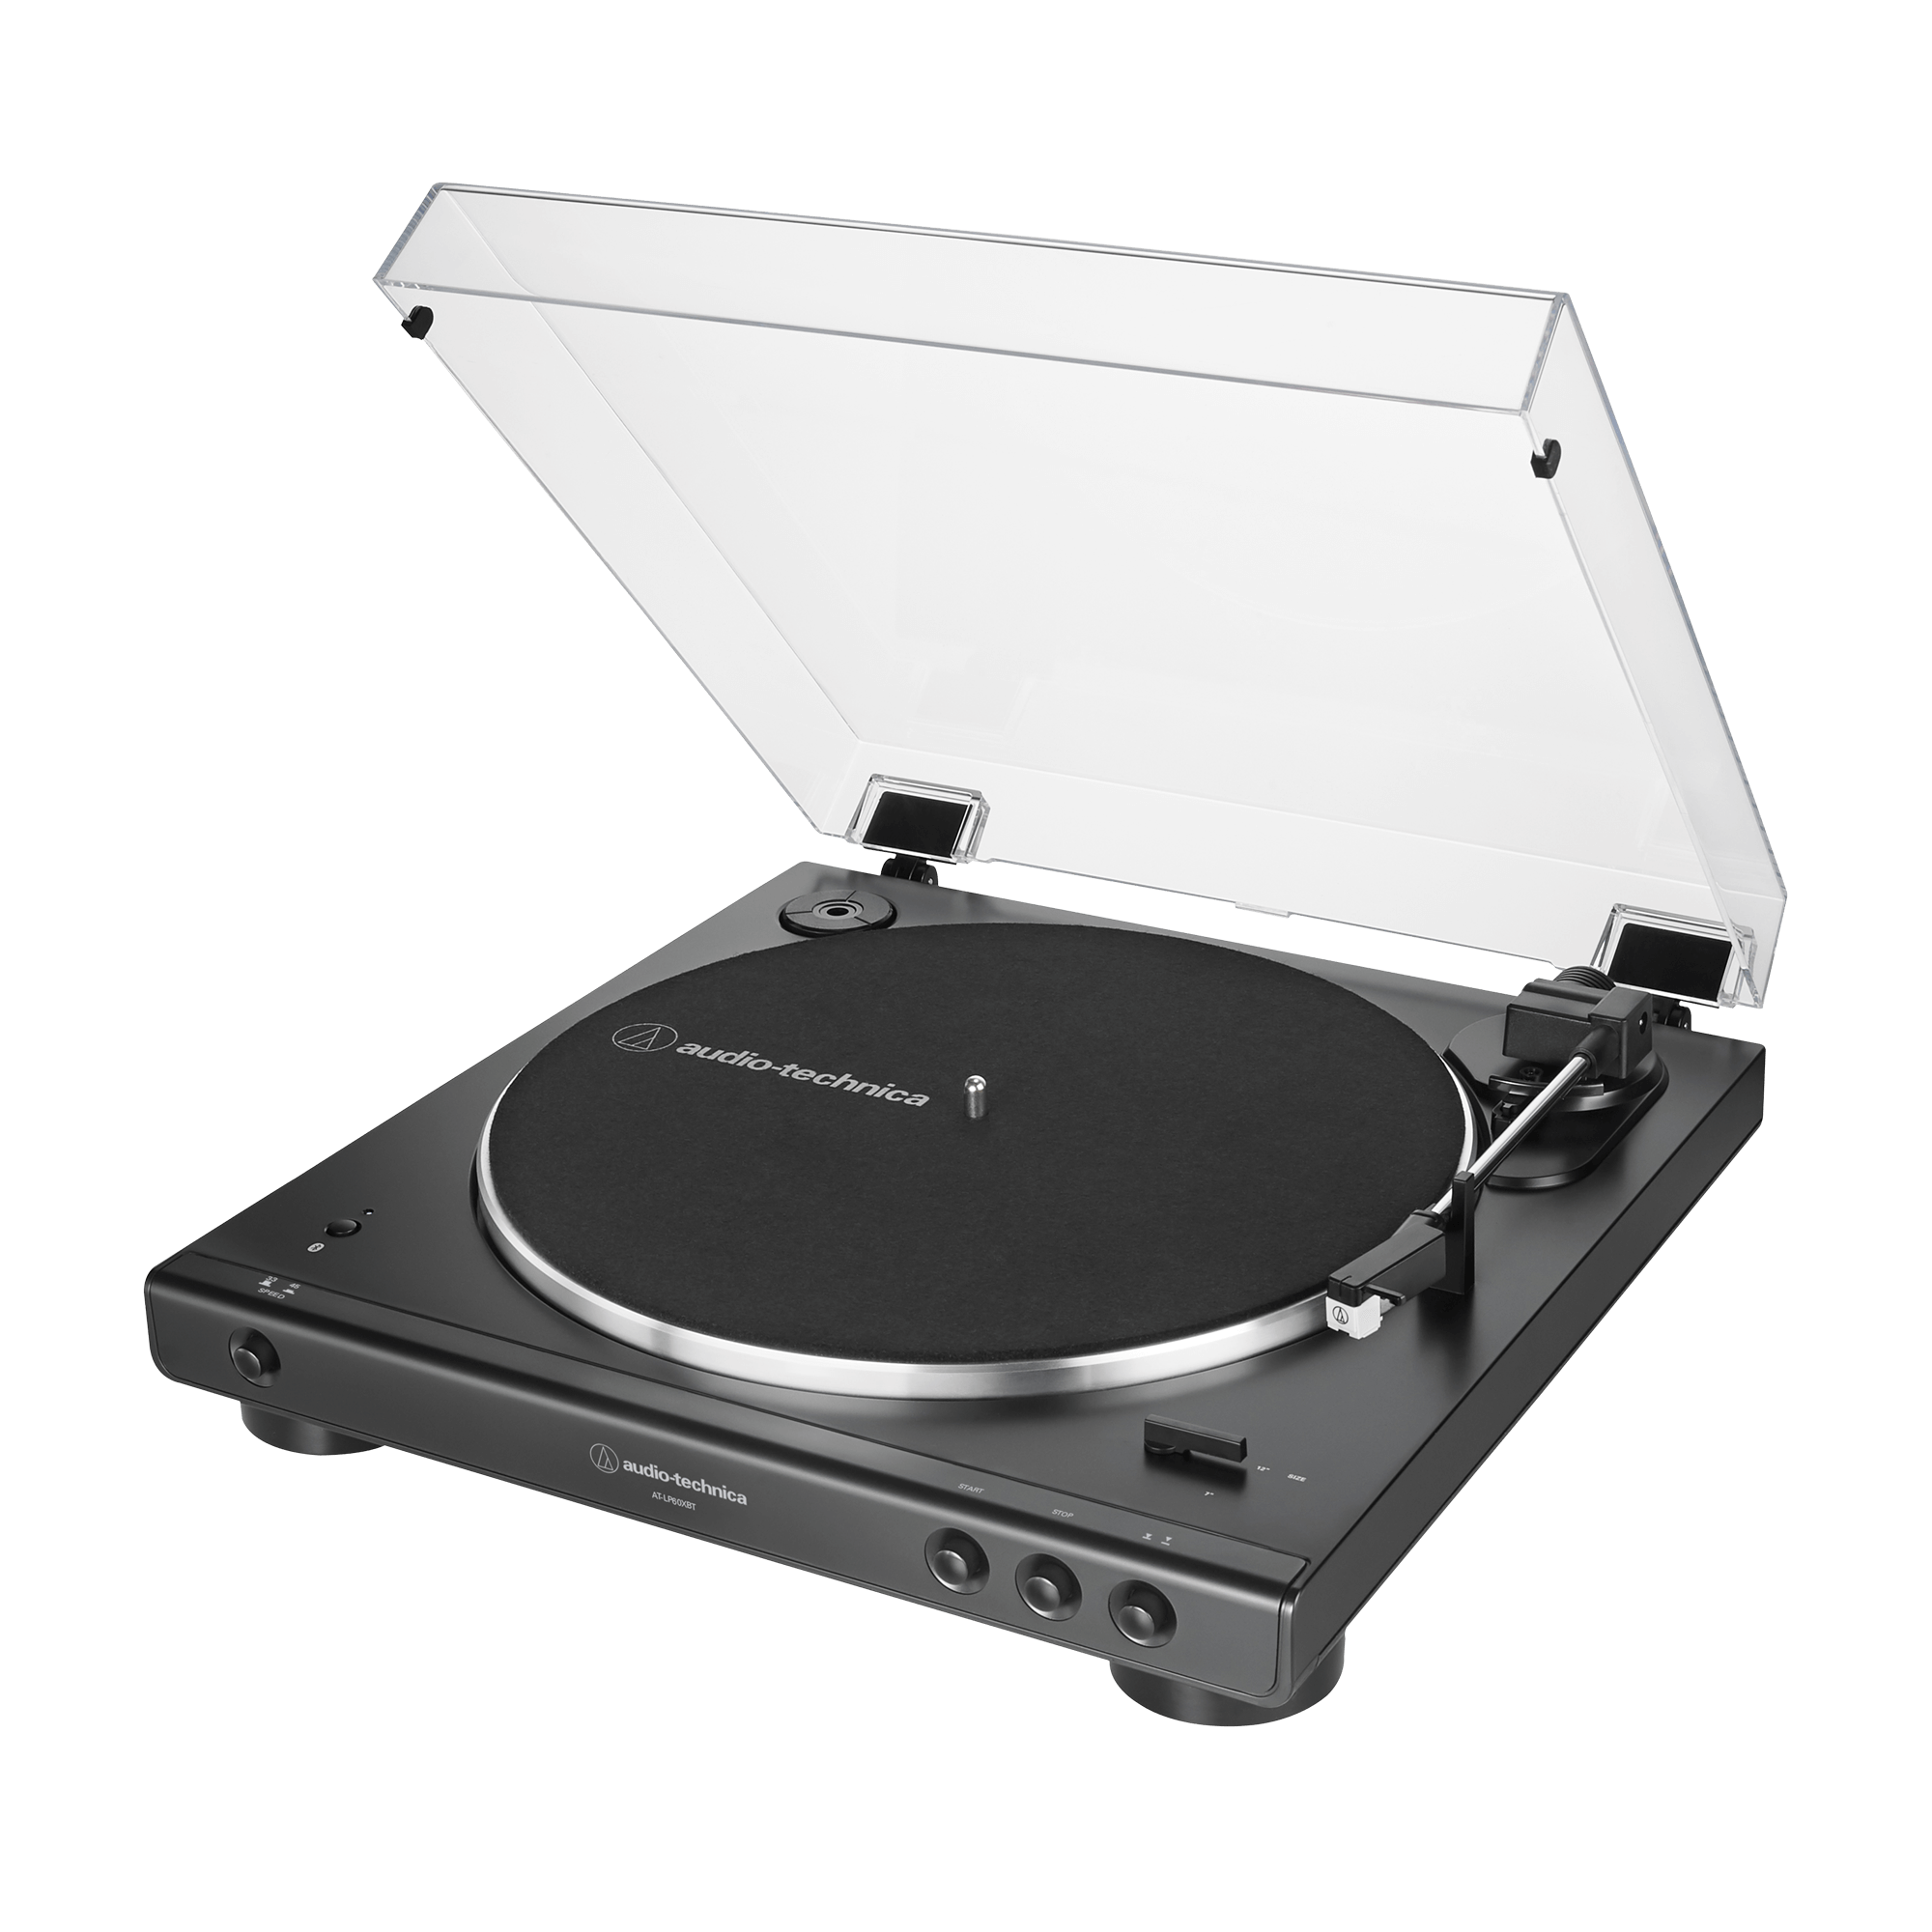 Original Audio Technica AT-LP60xbt Bluetooth Vinyl Record First, Fever  Retro First Phonograph, Stéréo Colorable, 220V AC Power